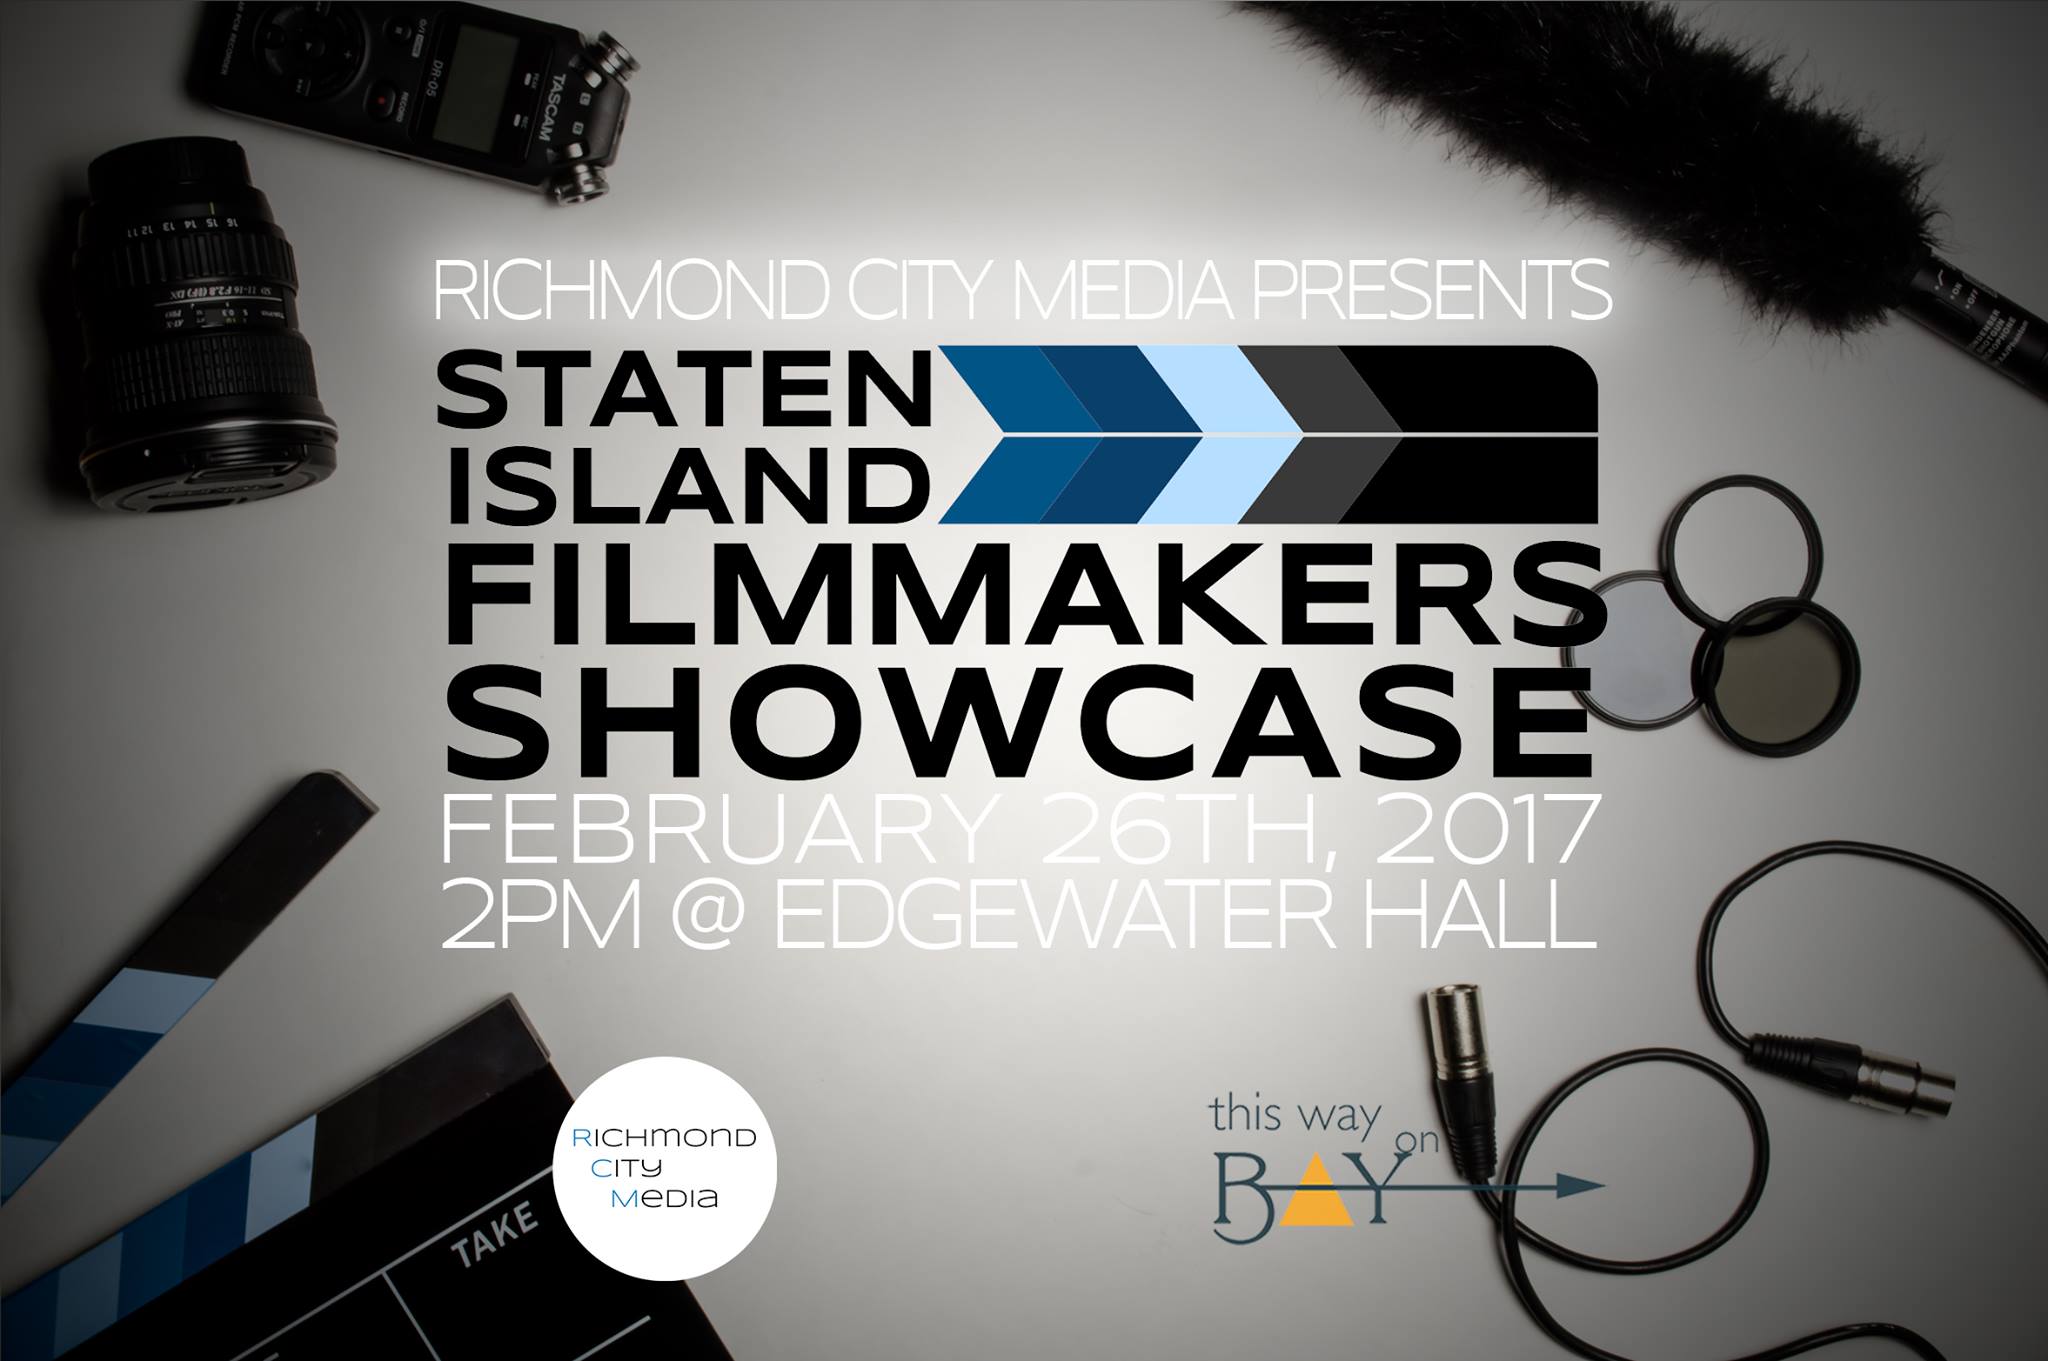 2017 Staten Island Filmmakers Showcase To Take Place at Edgewater Hall on February 26th